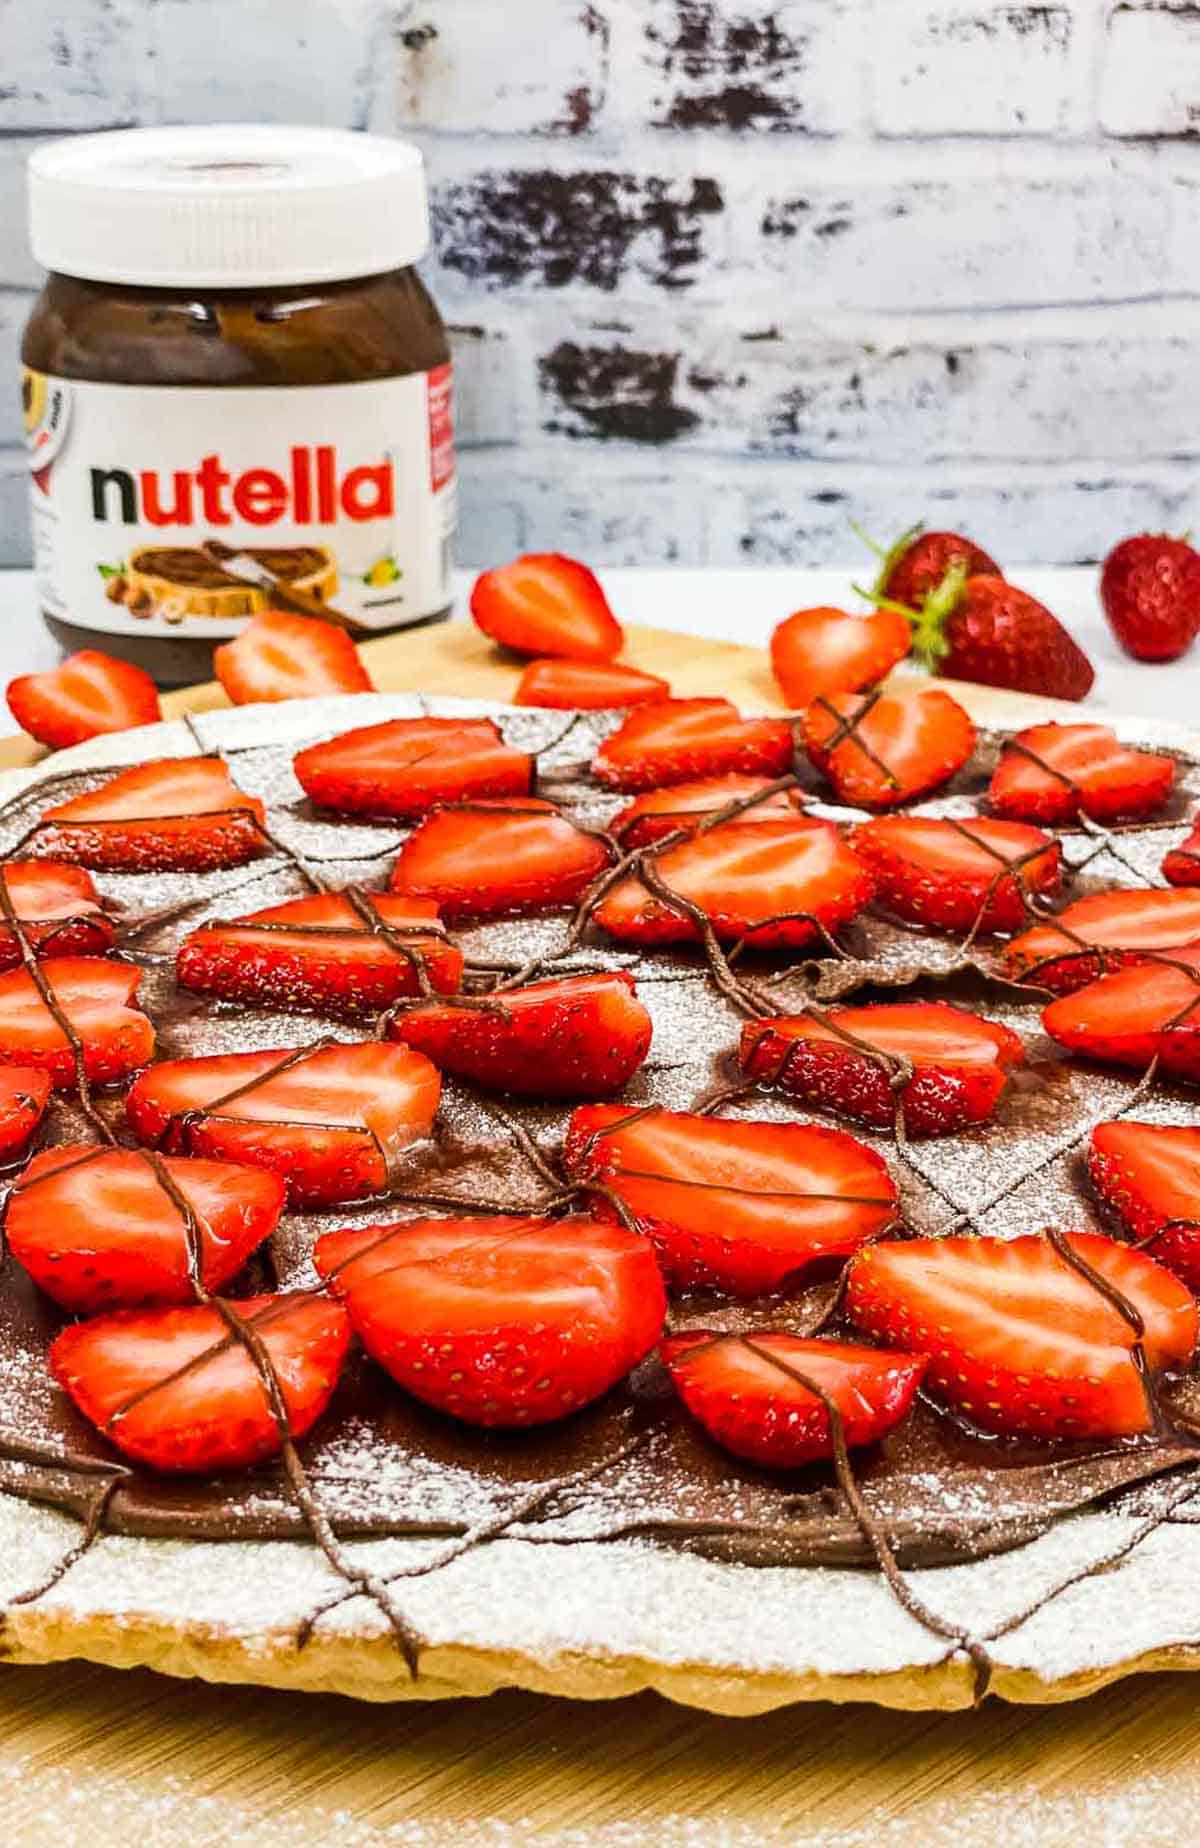 Delicious Nutella pizza with fresh sttrawberries and a jar of Nutella spread in the background.